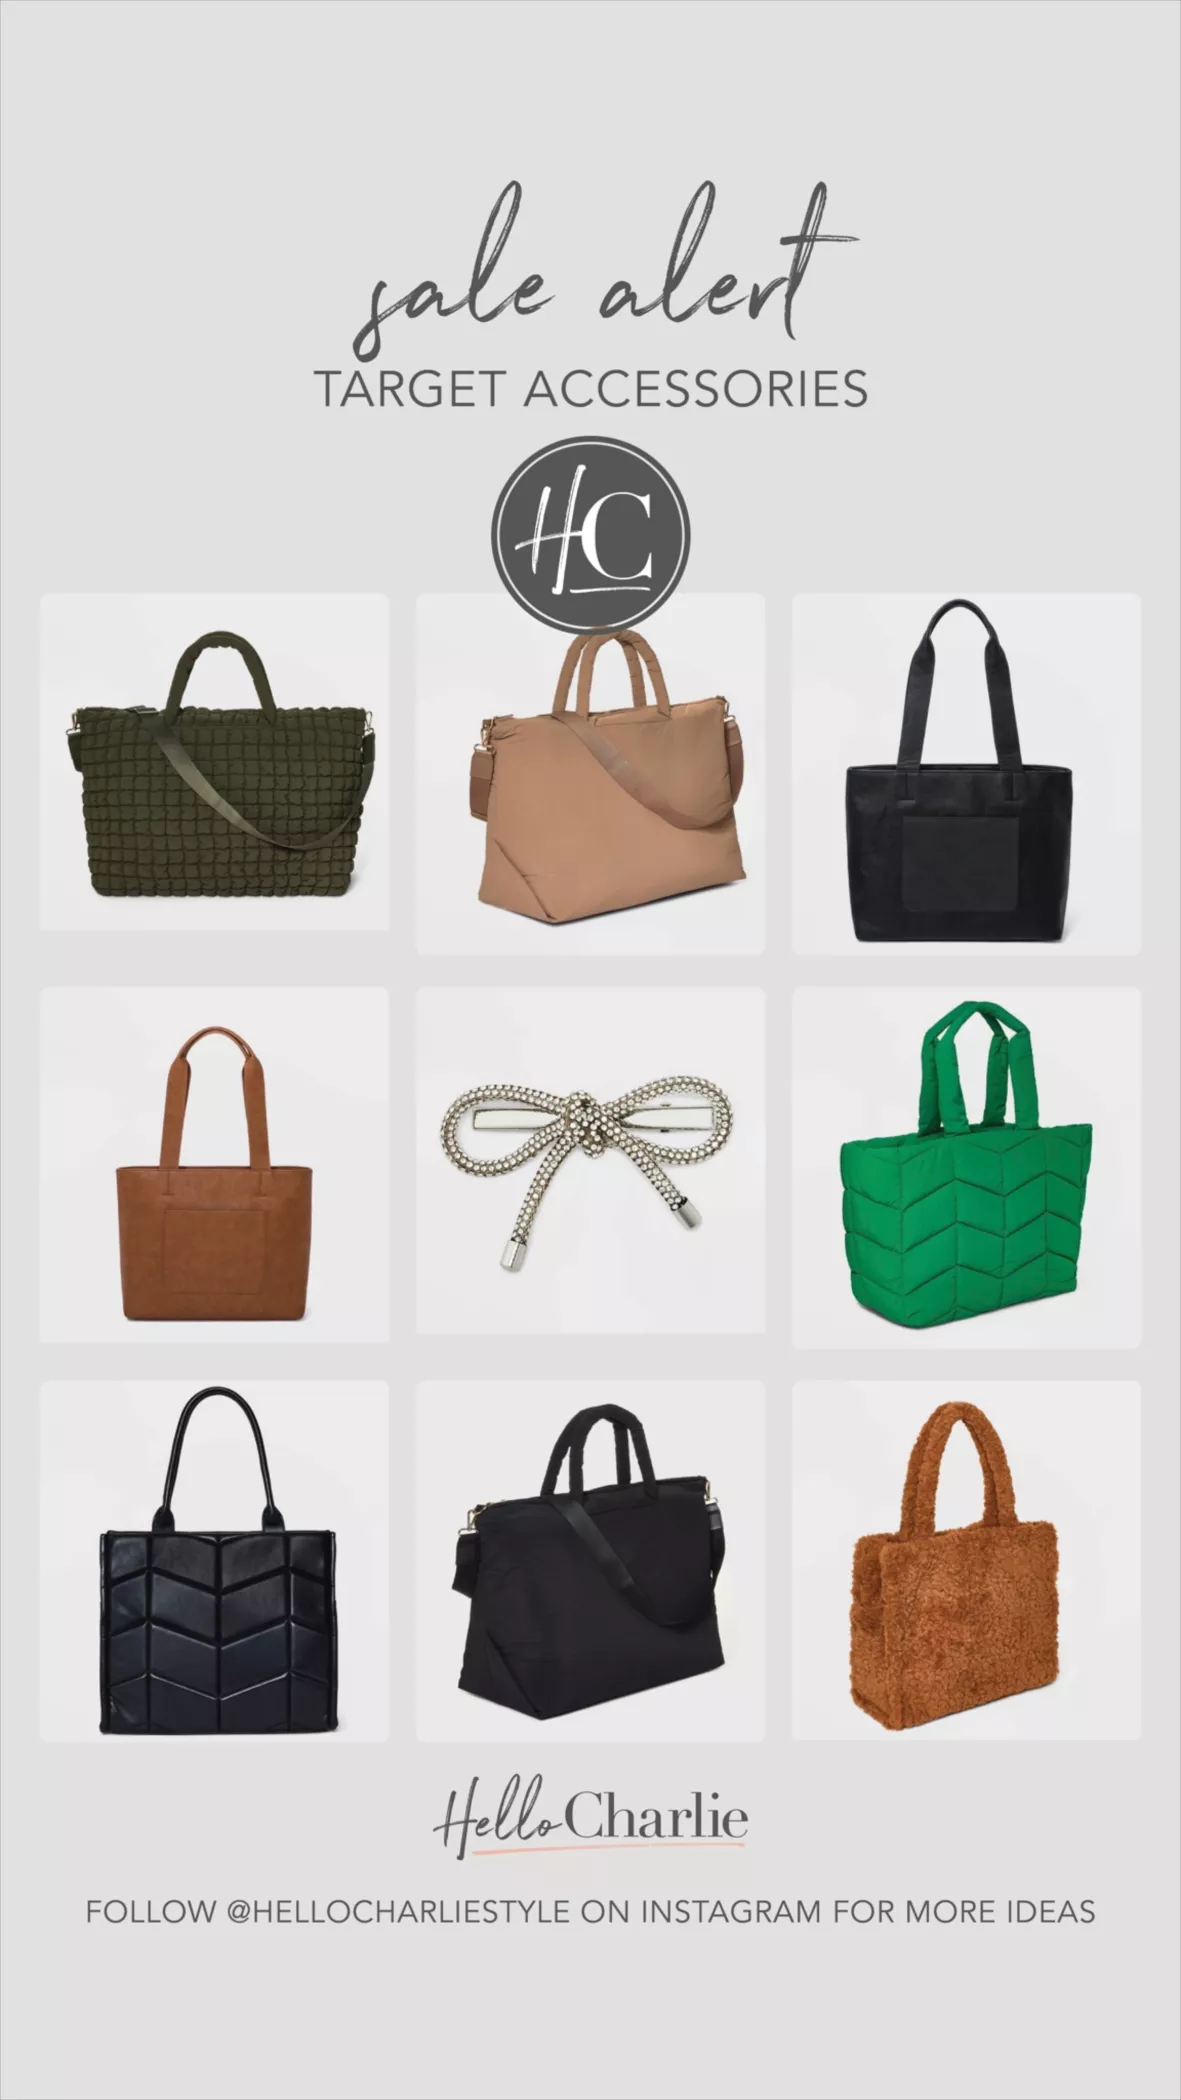 Handbags and Accessories